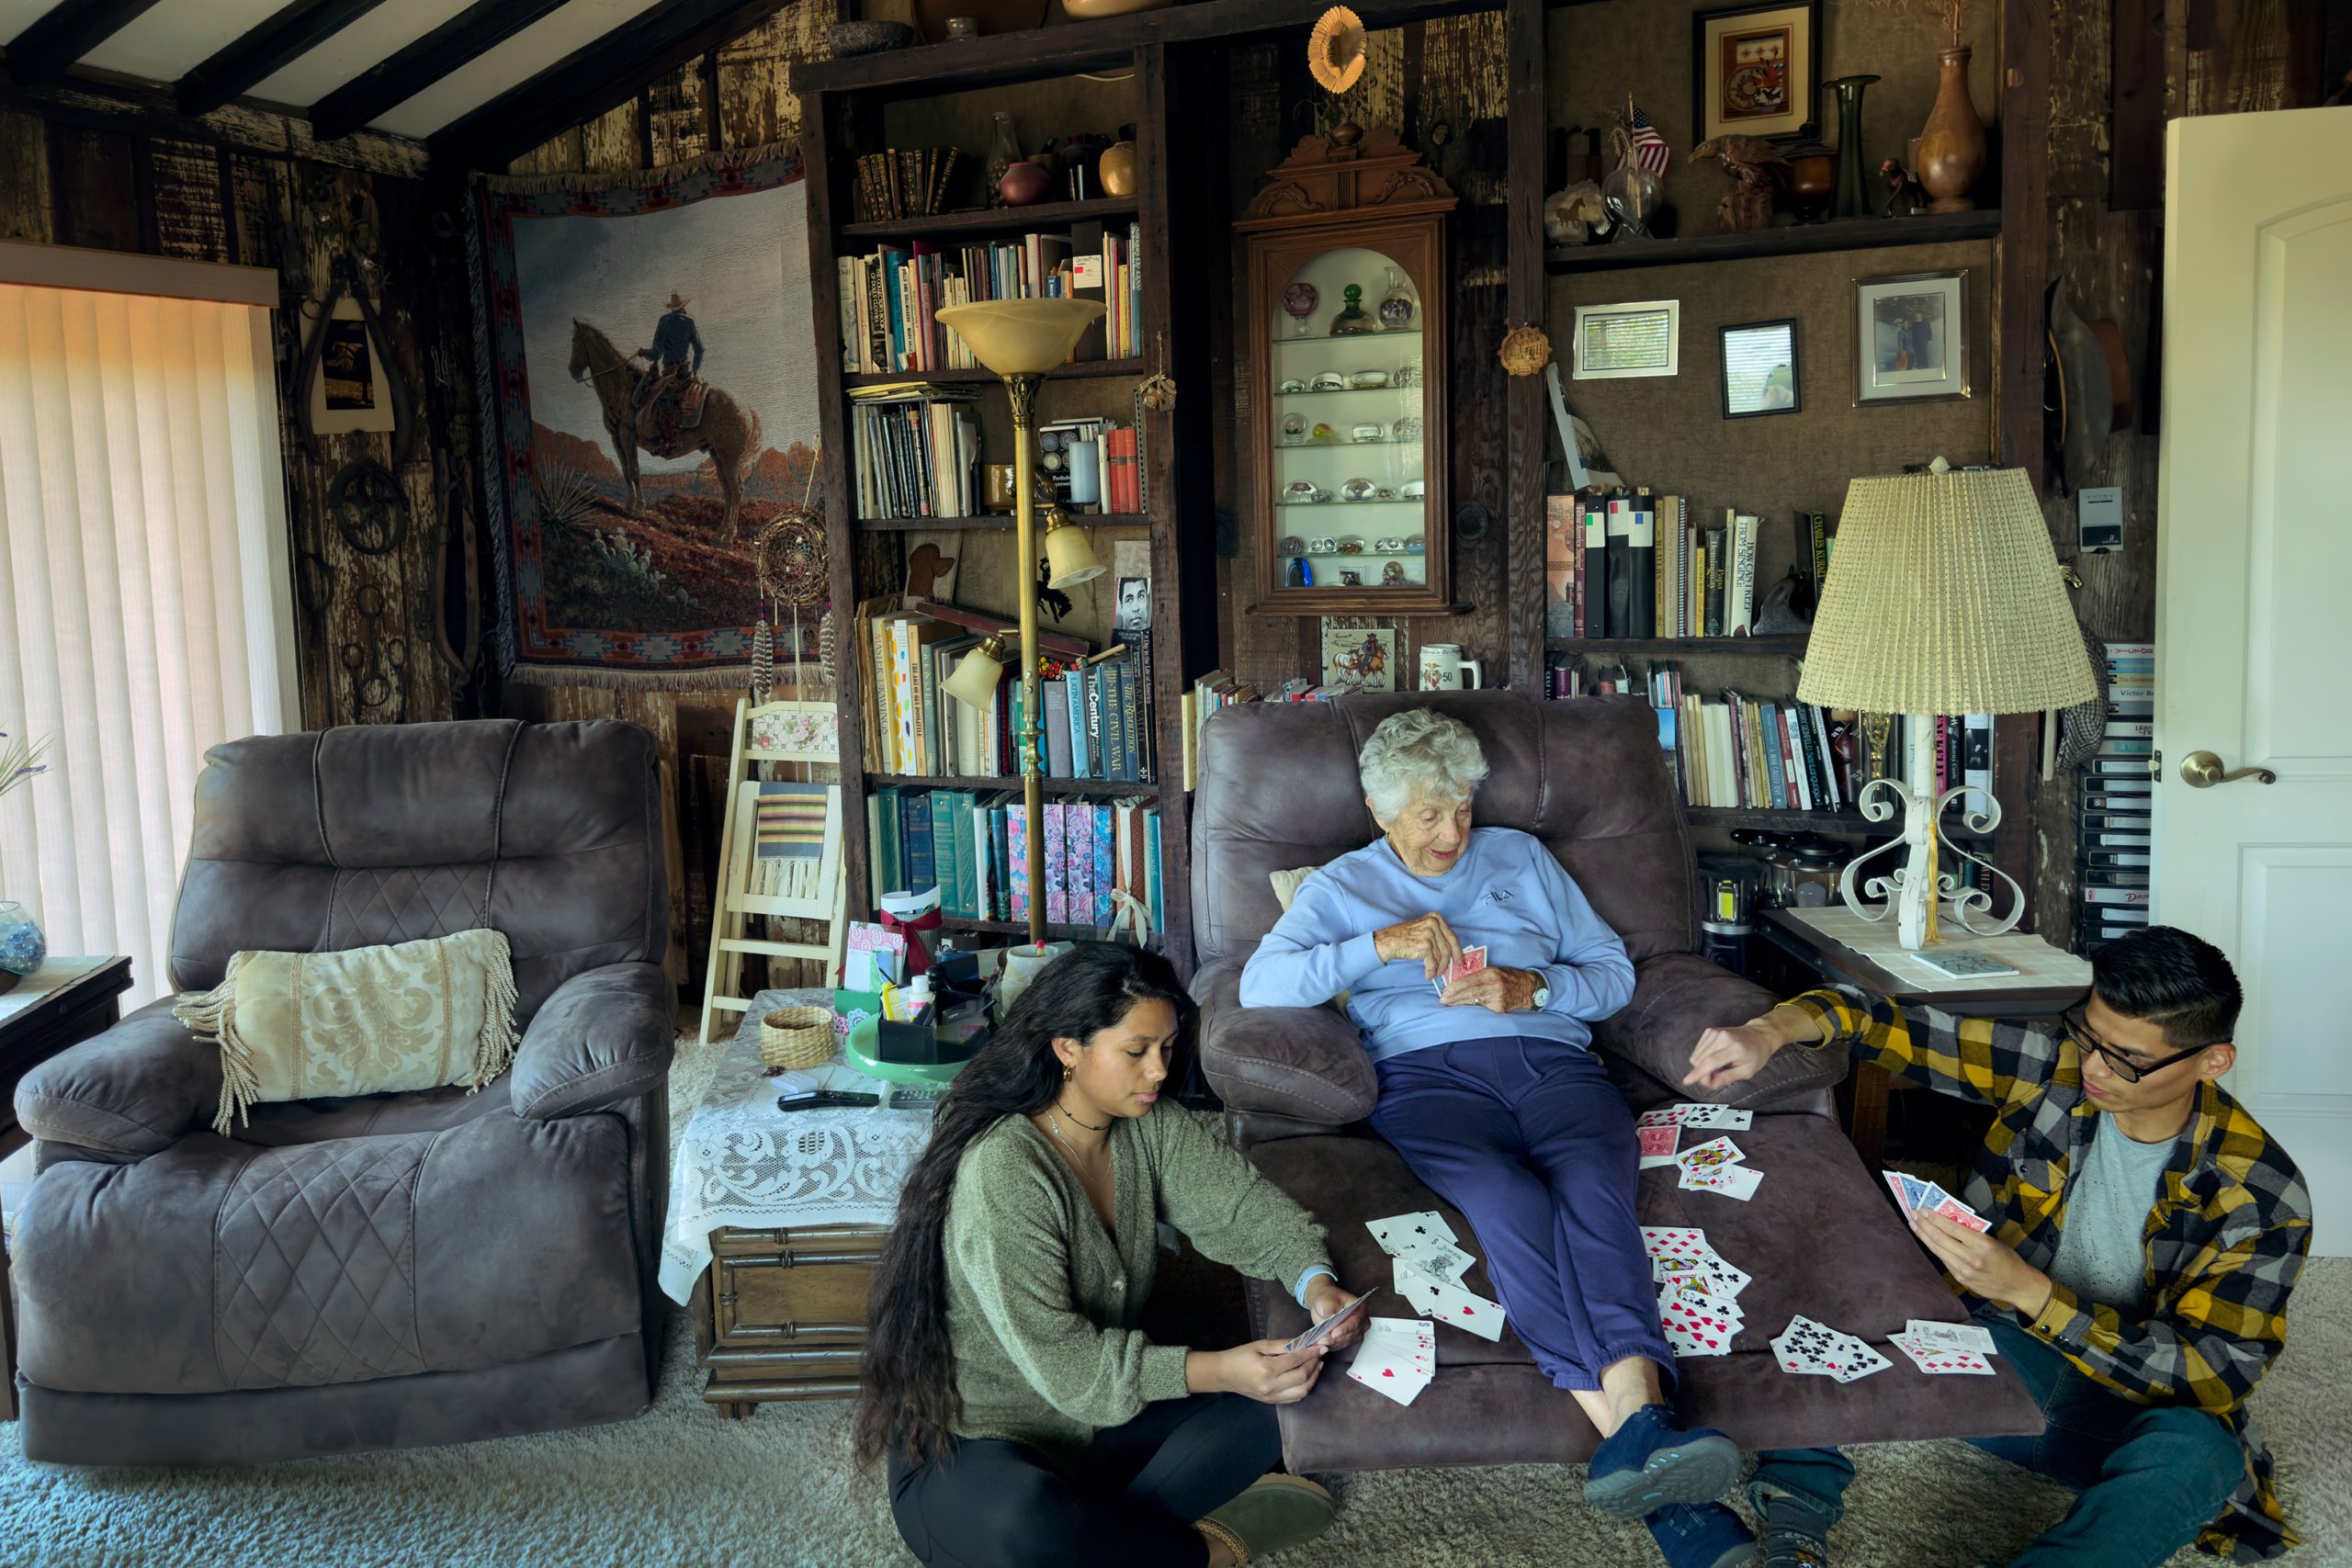 Raul sitting in the livingroom with his fiancé and grandmother playing cards.